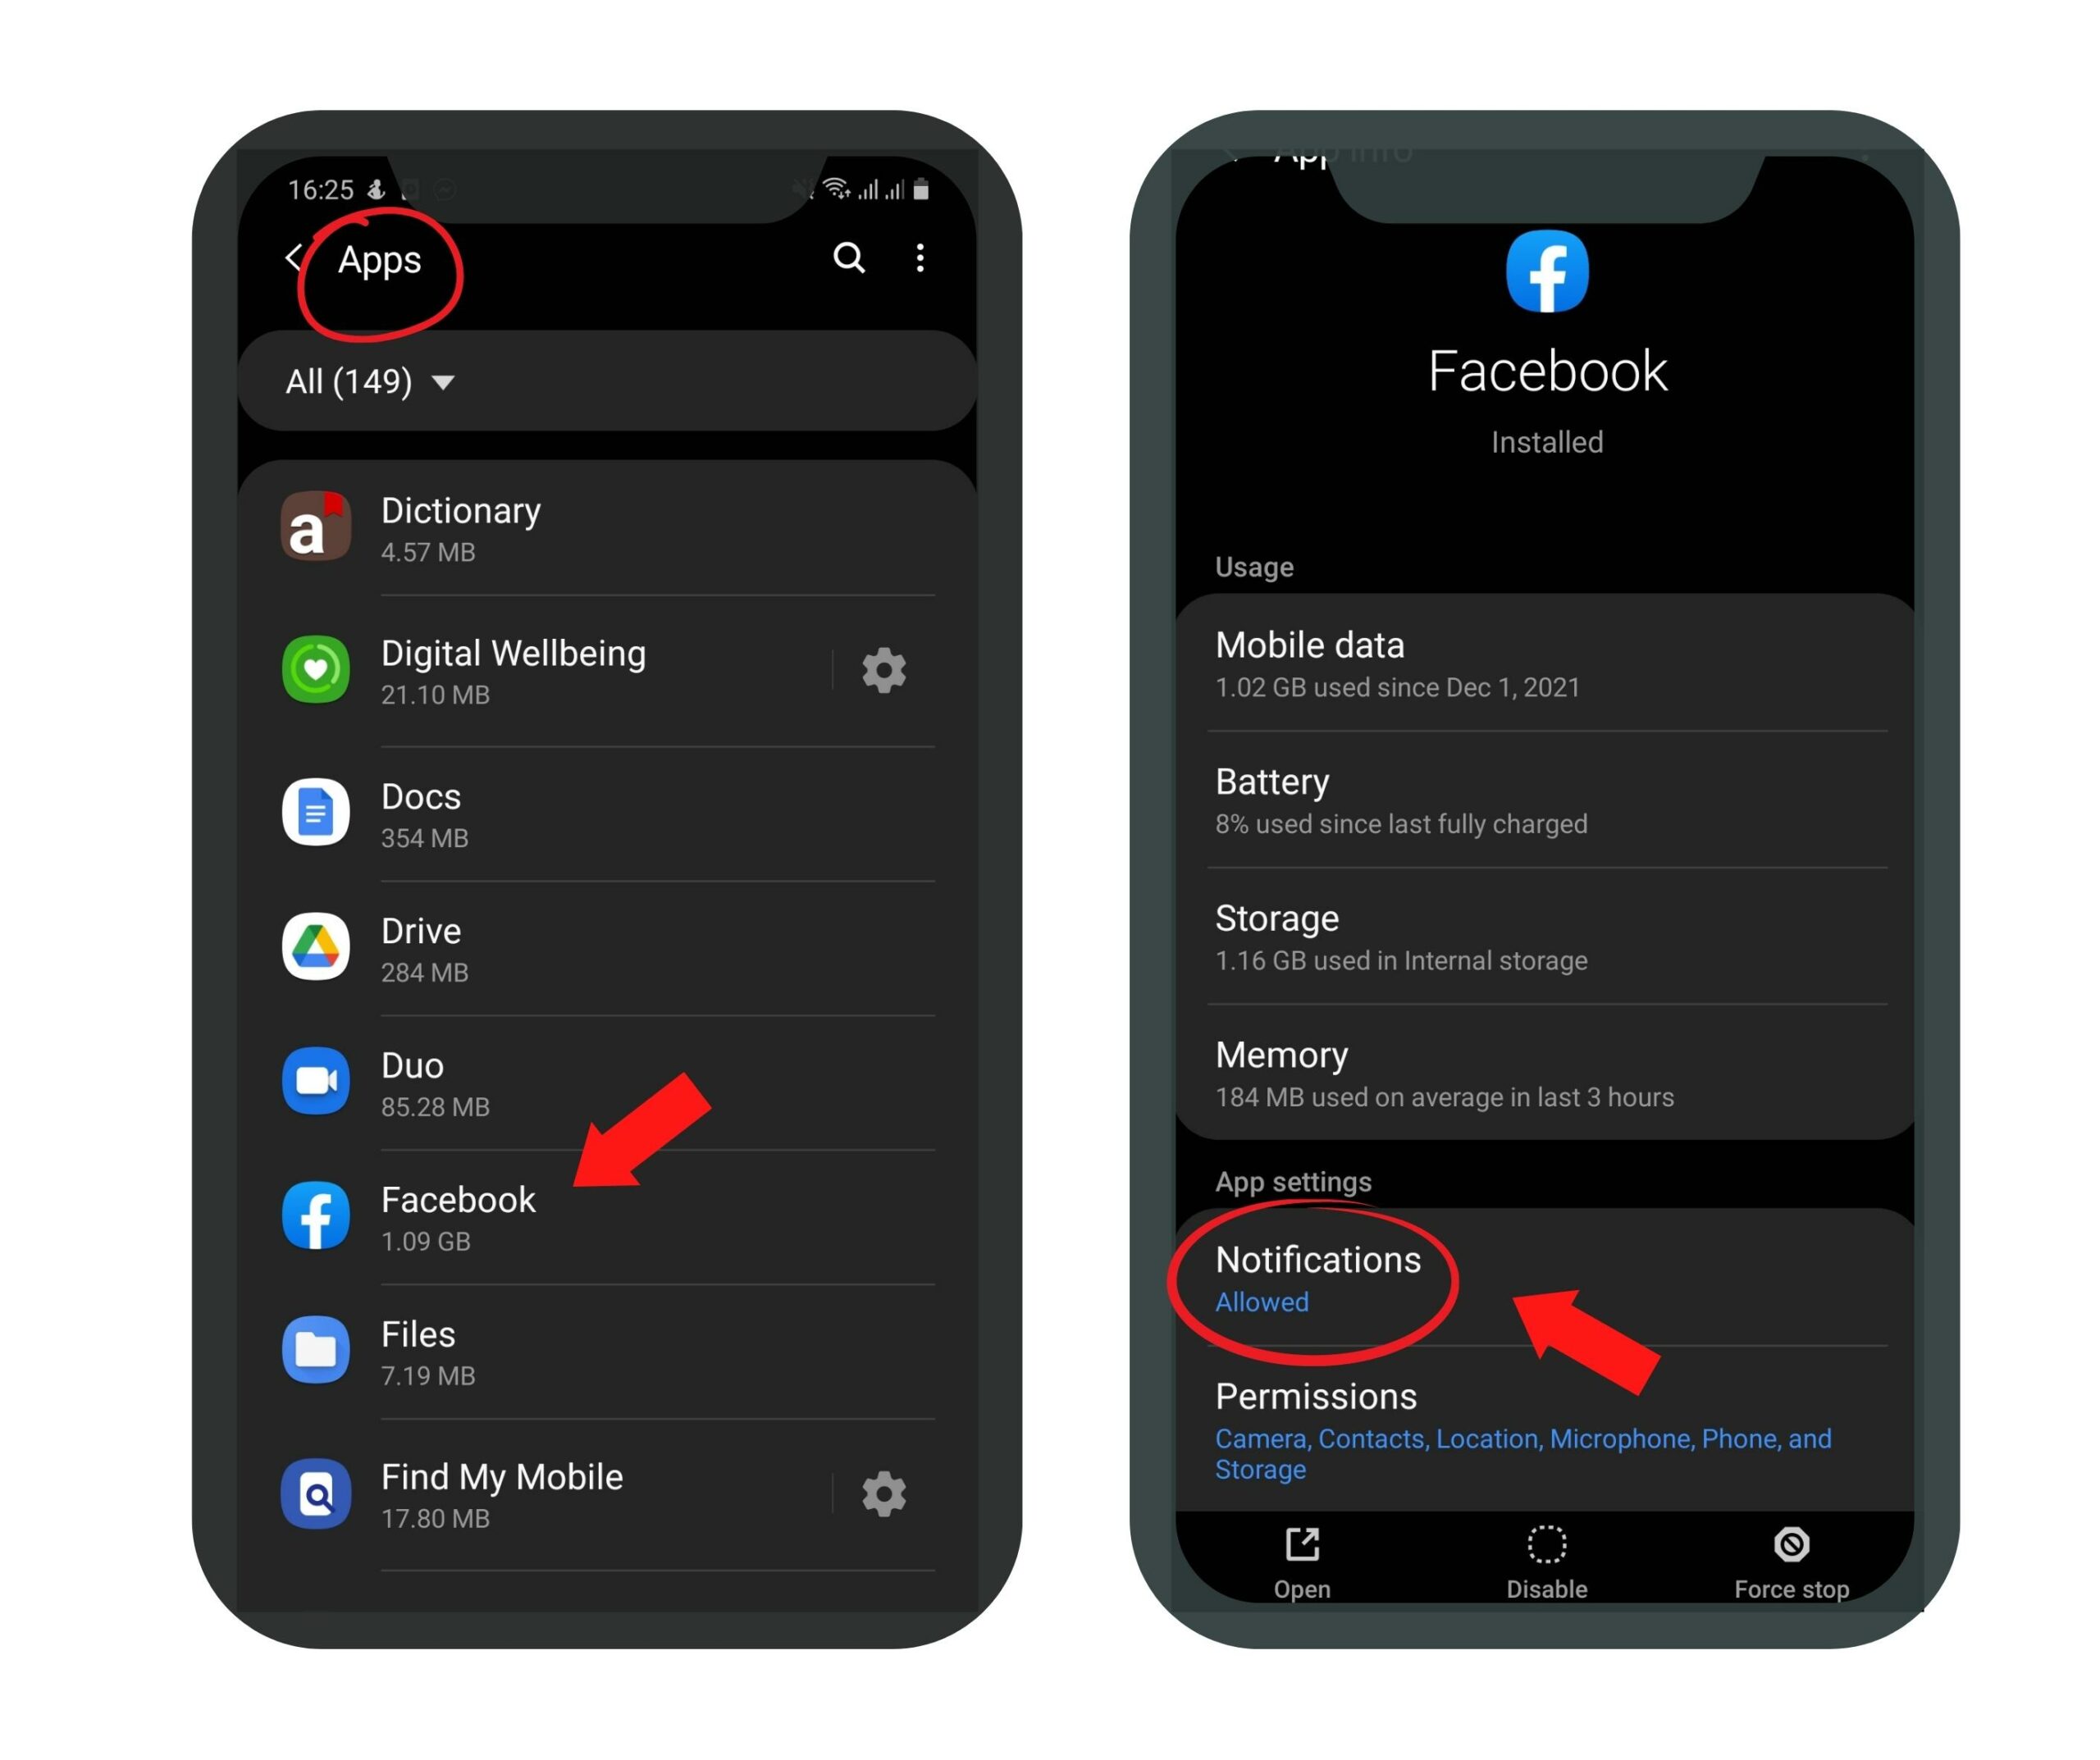 Open the “Settings” tab on your smartphone and select the notifications tab